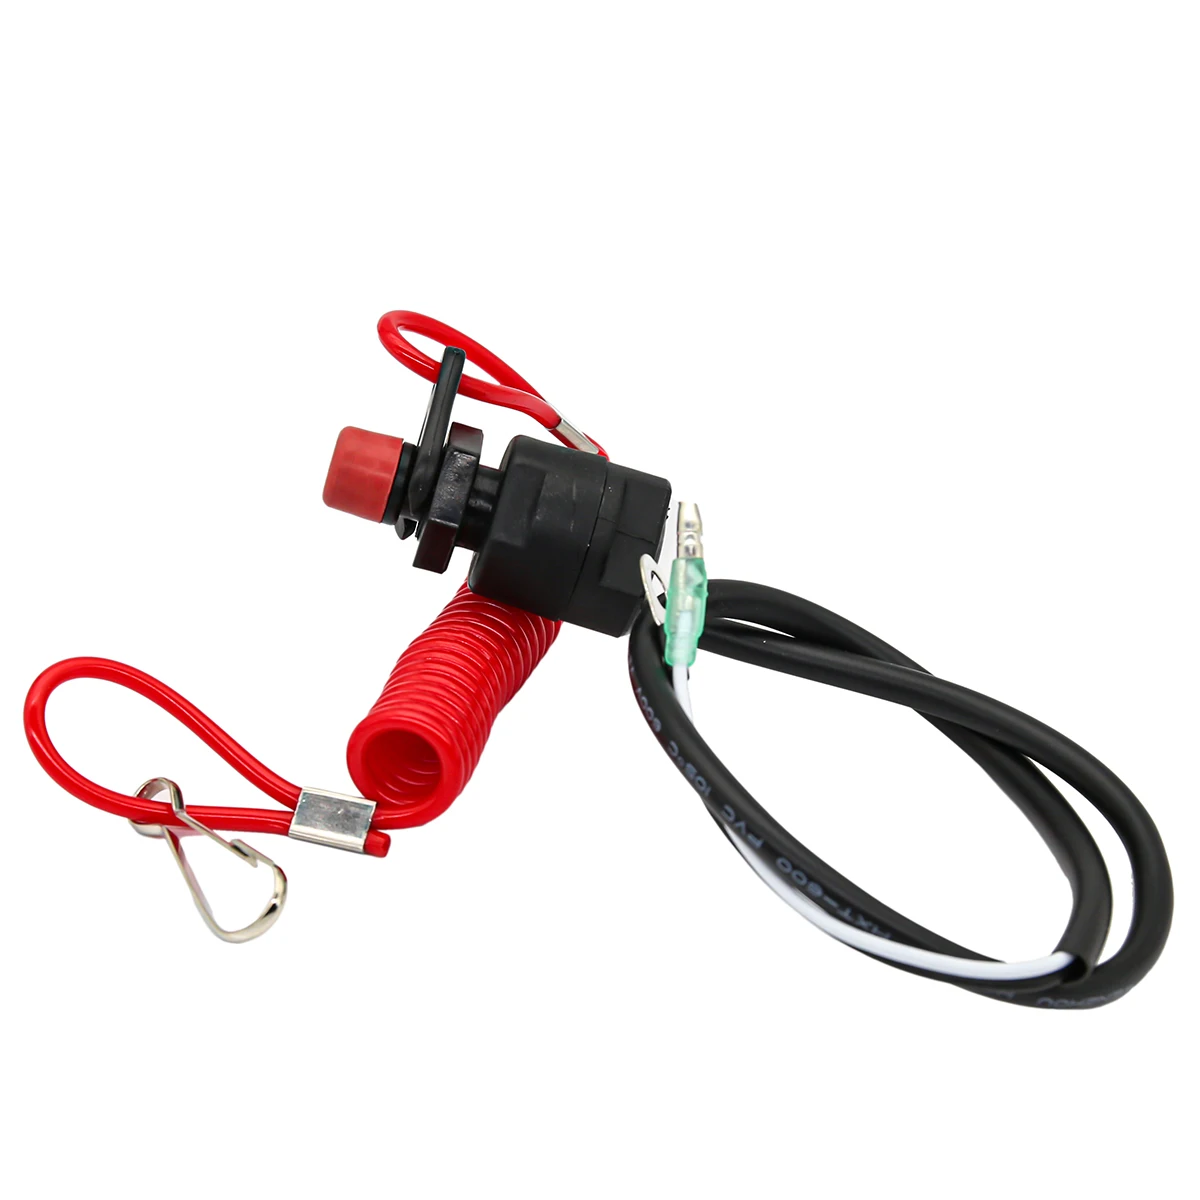 

Boat Outboard Engine Motor Kill Stop Switch Safety Tether Lanyard Motorcycle For Quad Pit Dirt ATV Bike